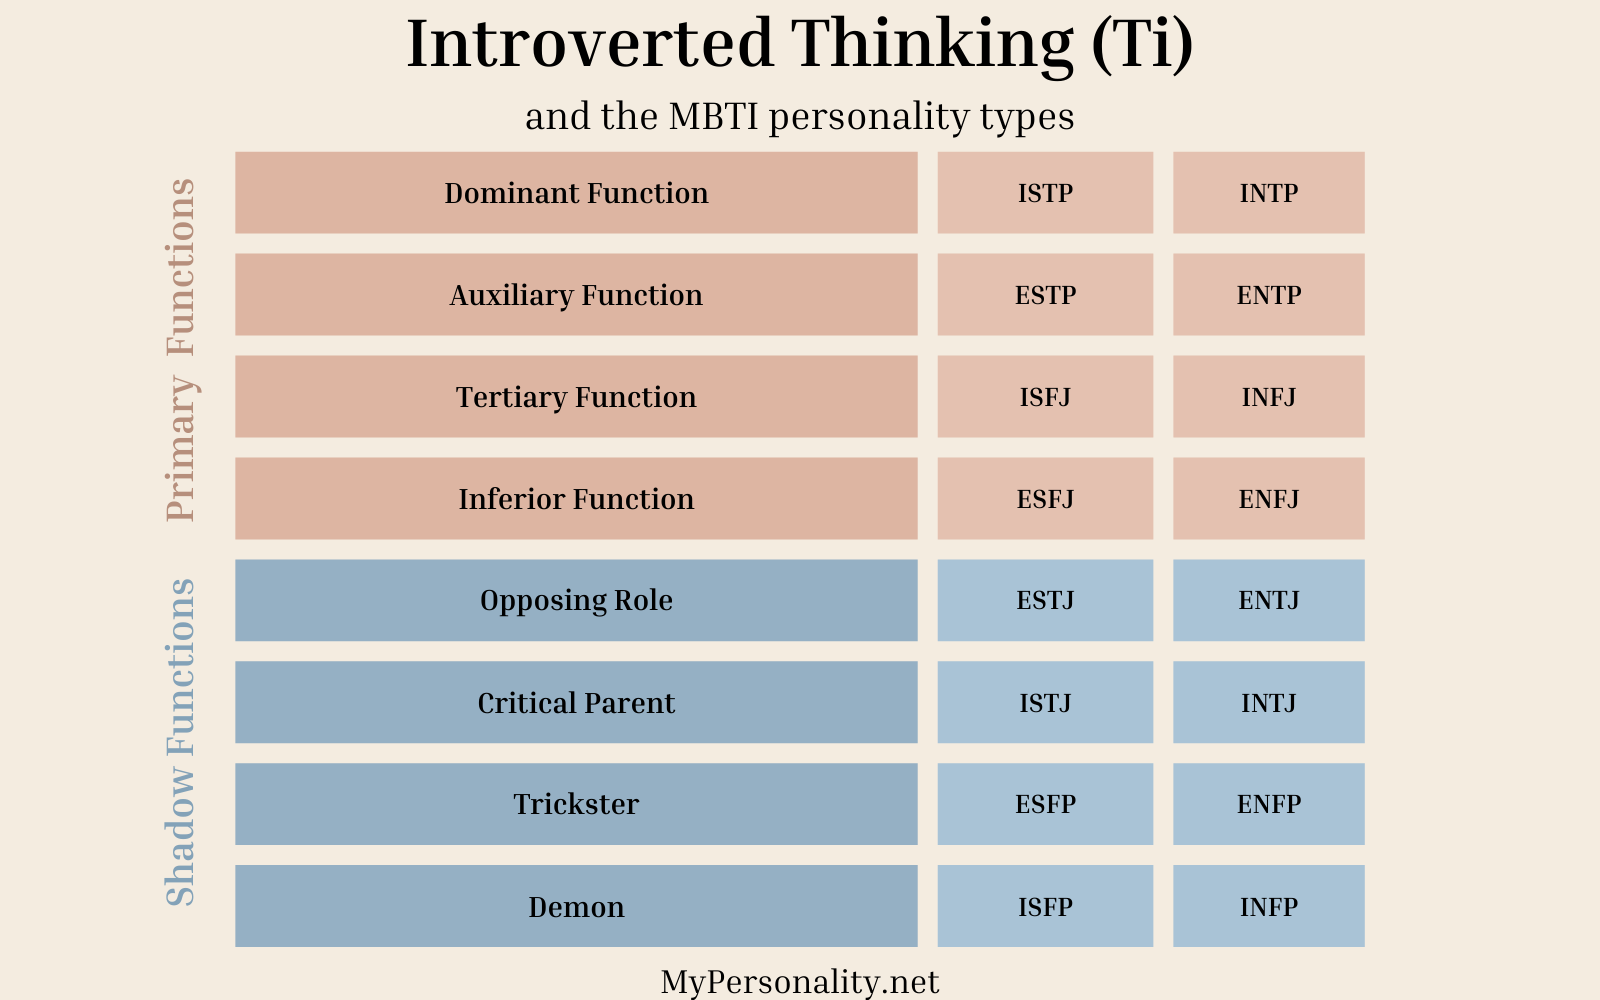 Introverted thinking (Ti)